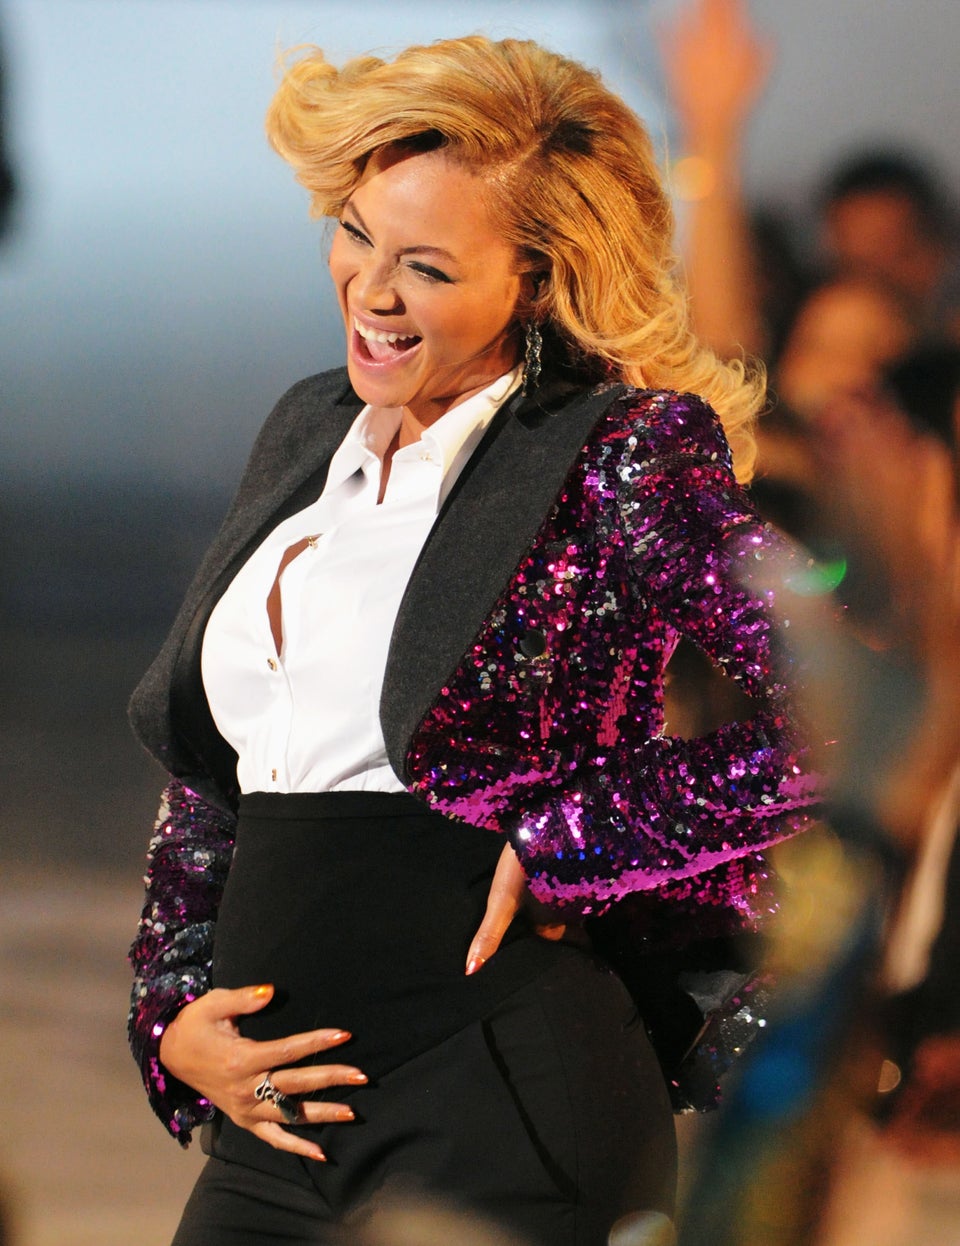 Beyonce Couldn’t Wait Any Longer to Announce Pregnancy